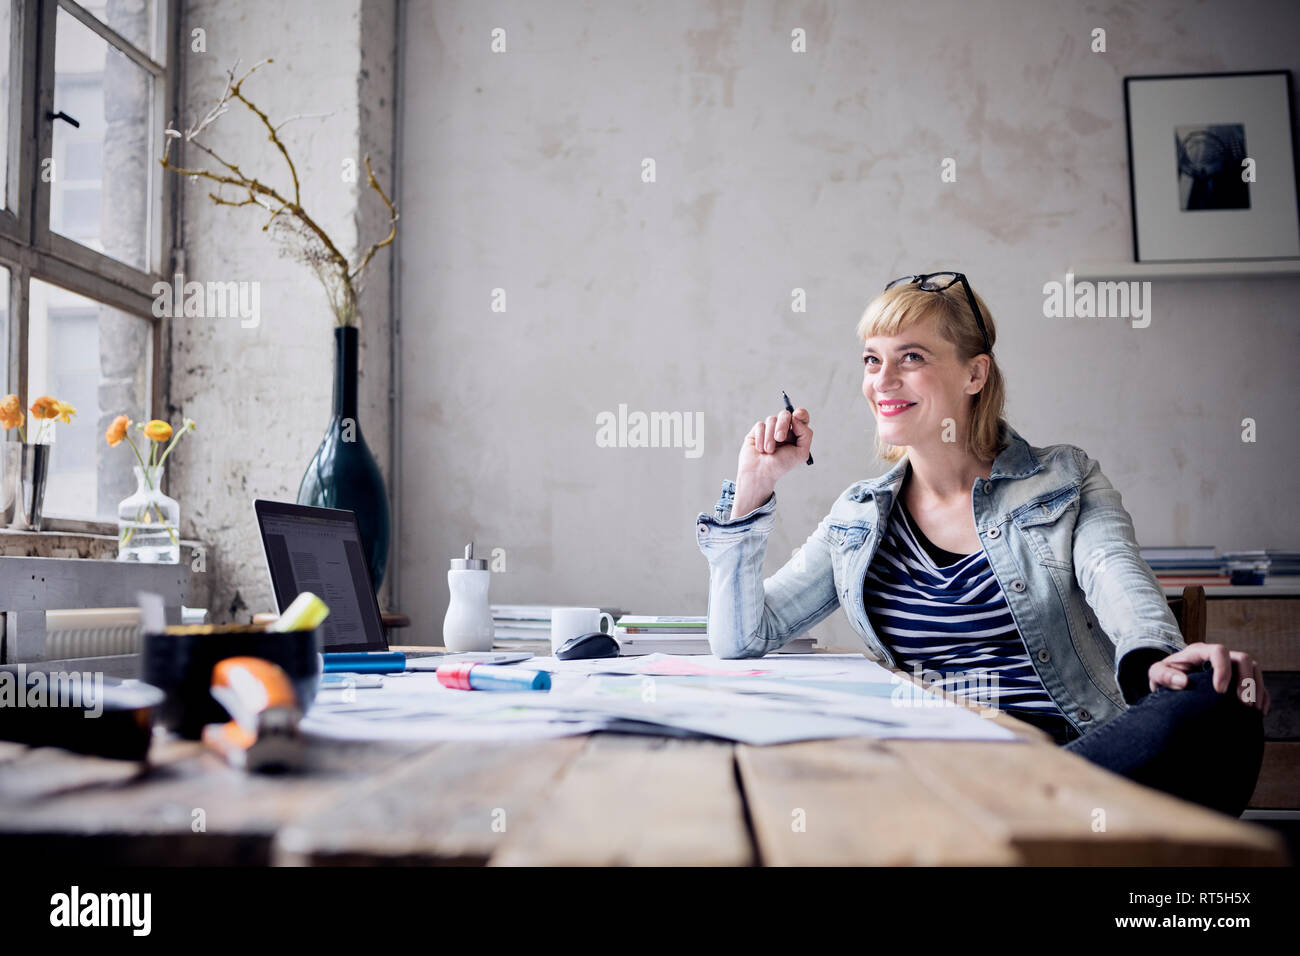 Portrait of laughing woman sitting at desk in a loft Stock Photo